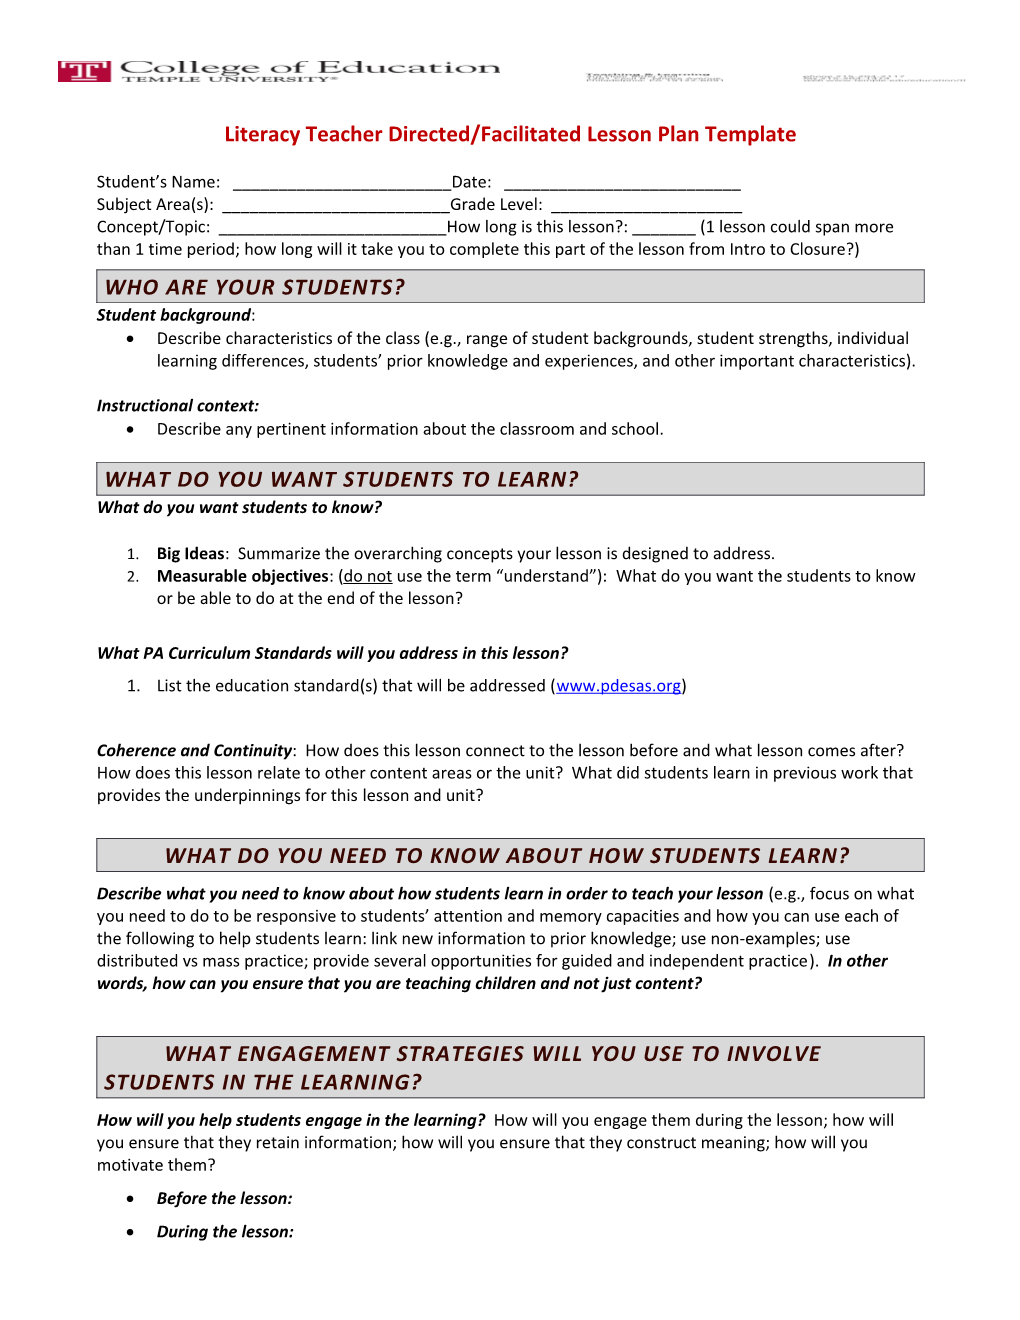 Literacy Teacher Directed/Facilitated Lesson Plan Template